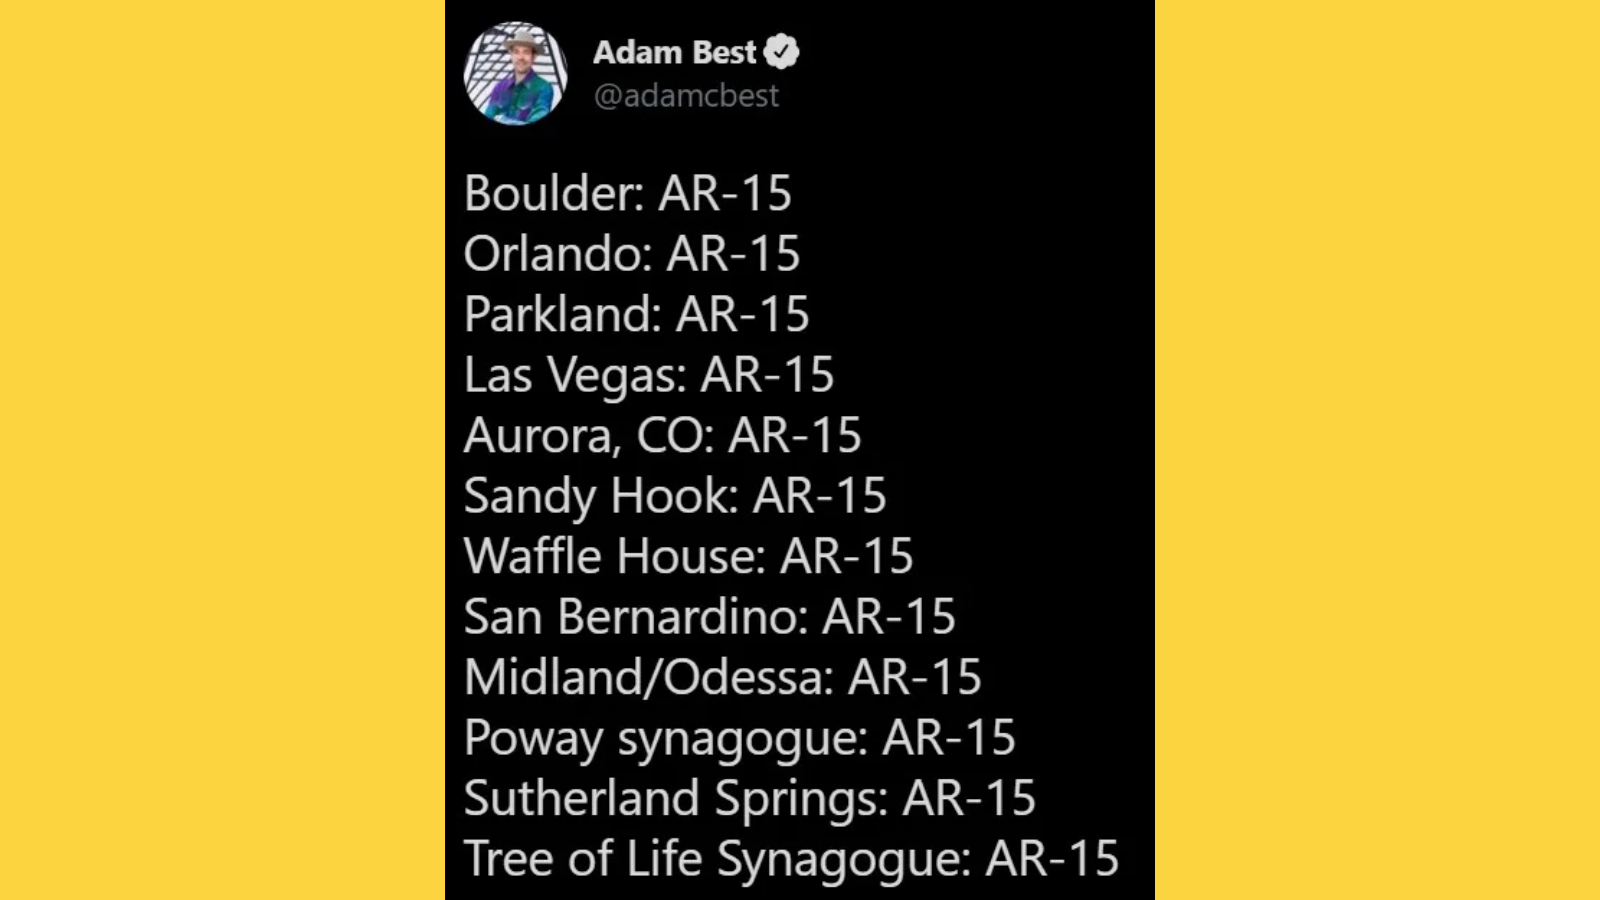 a list of massacres in the u.s. purported to be done with an ar-15